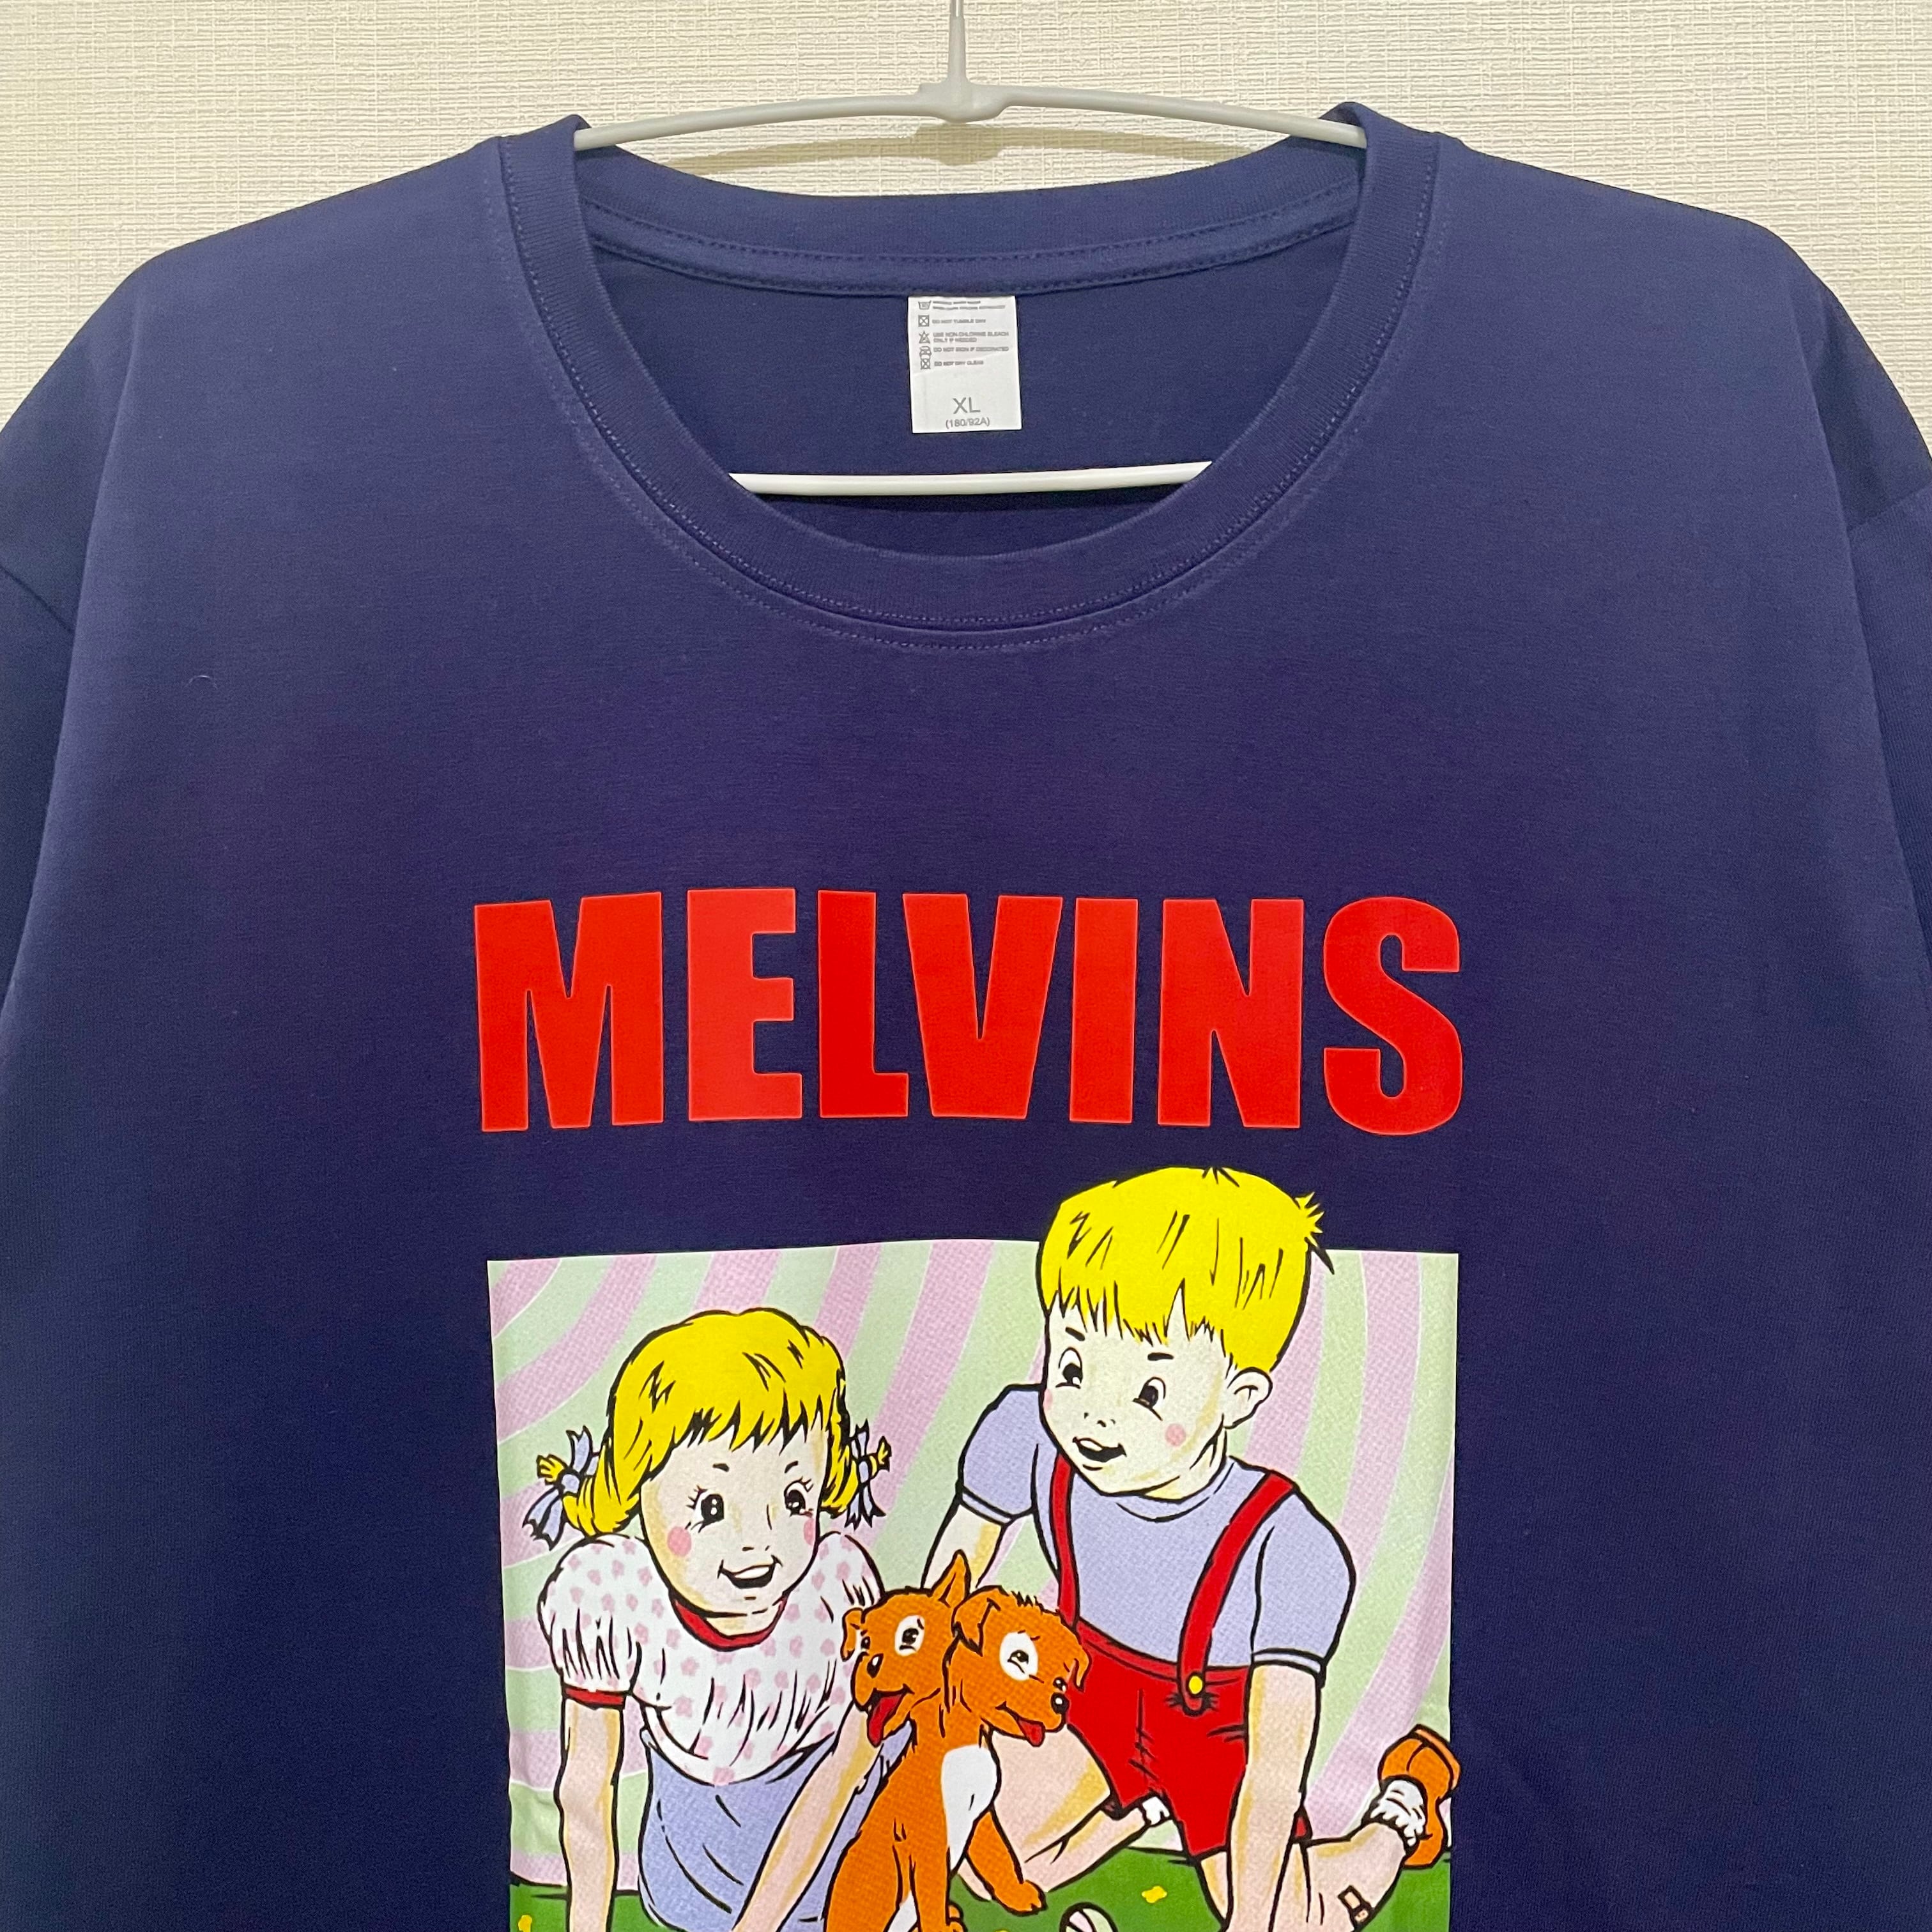 MELVINS Tシャツ メルヴィンズ Tee | BF MERCH'S